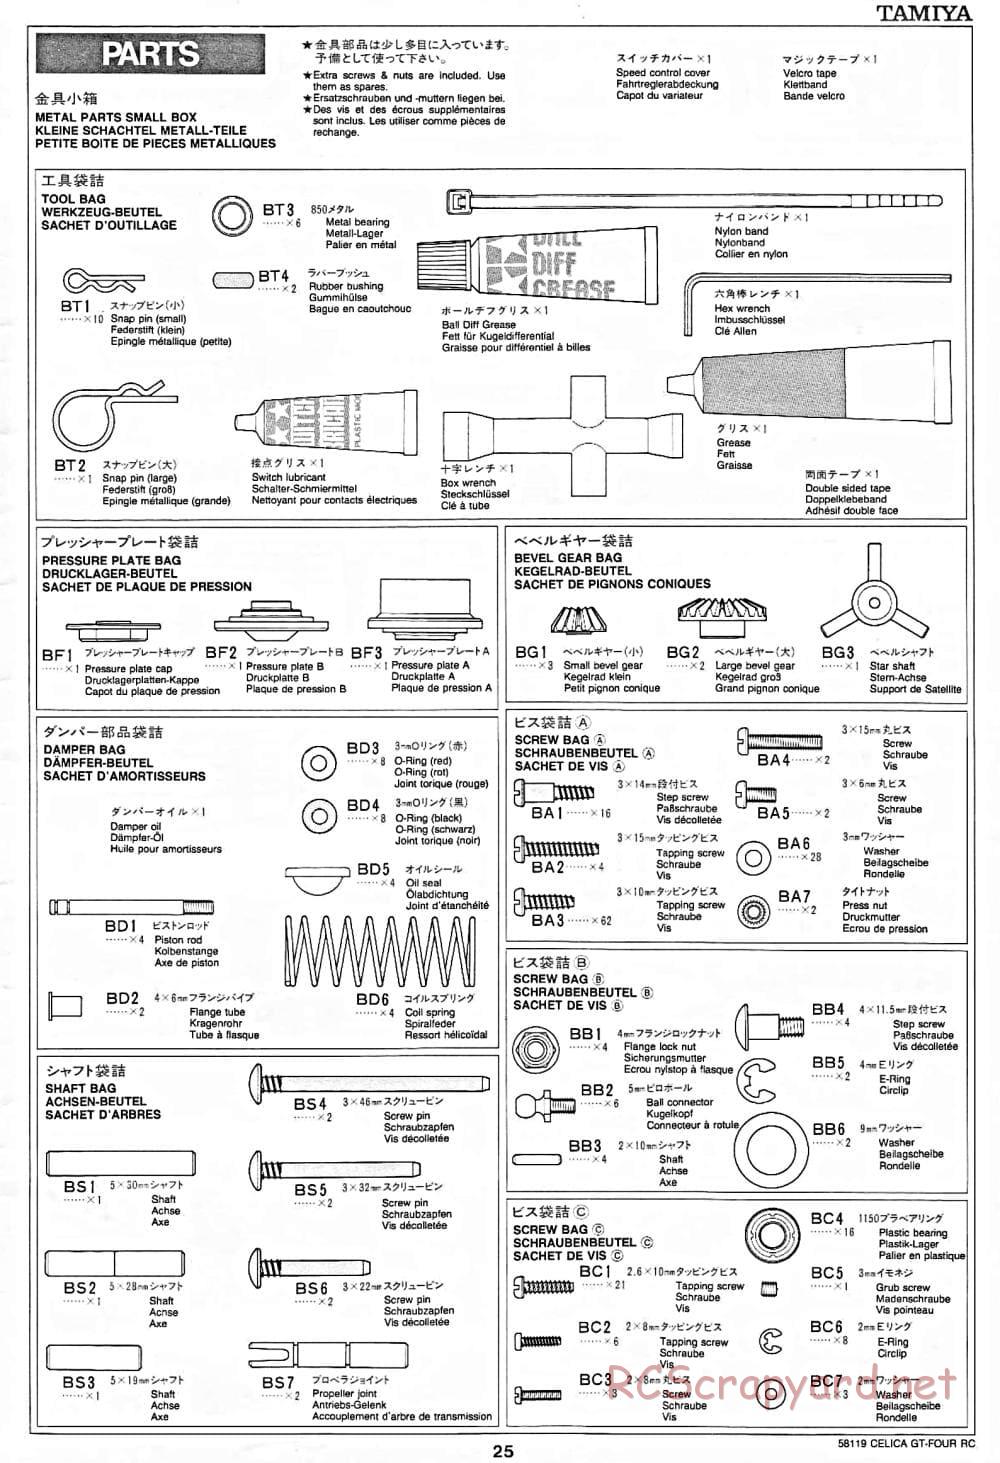 Tamiya - Toyota Celica GT-Four RC - TA-01 Chassis - Manual - Page 25